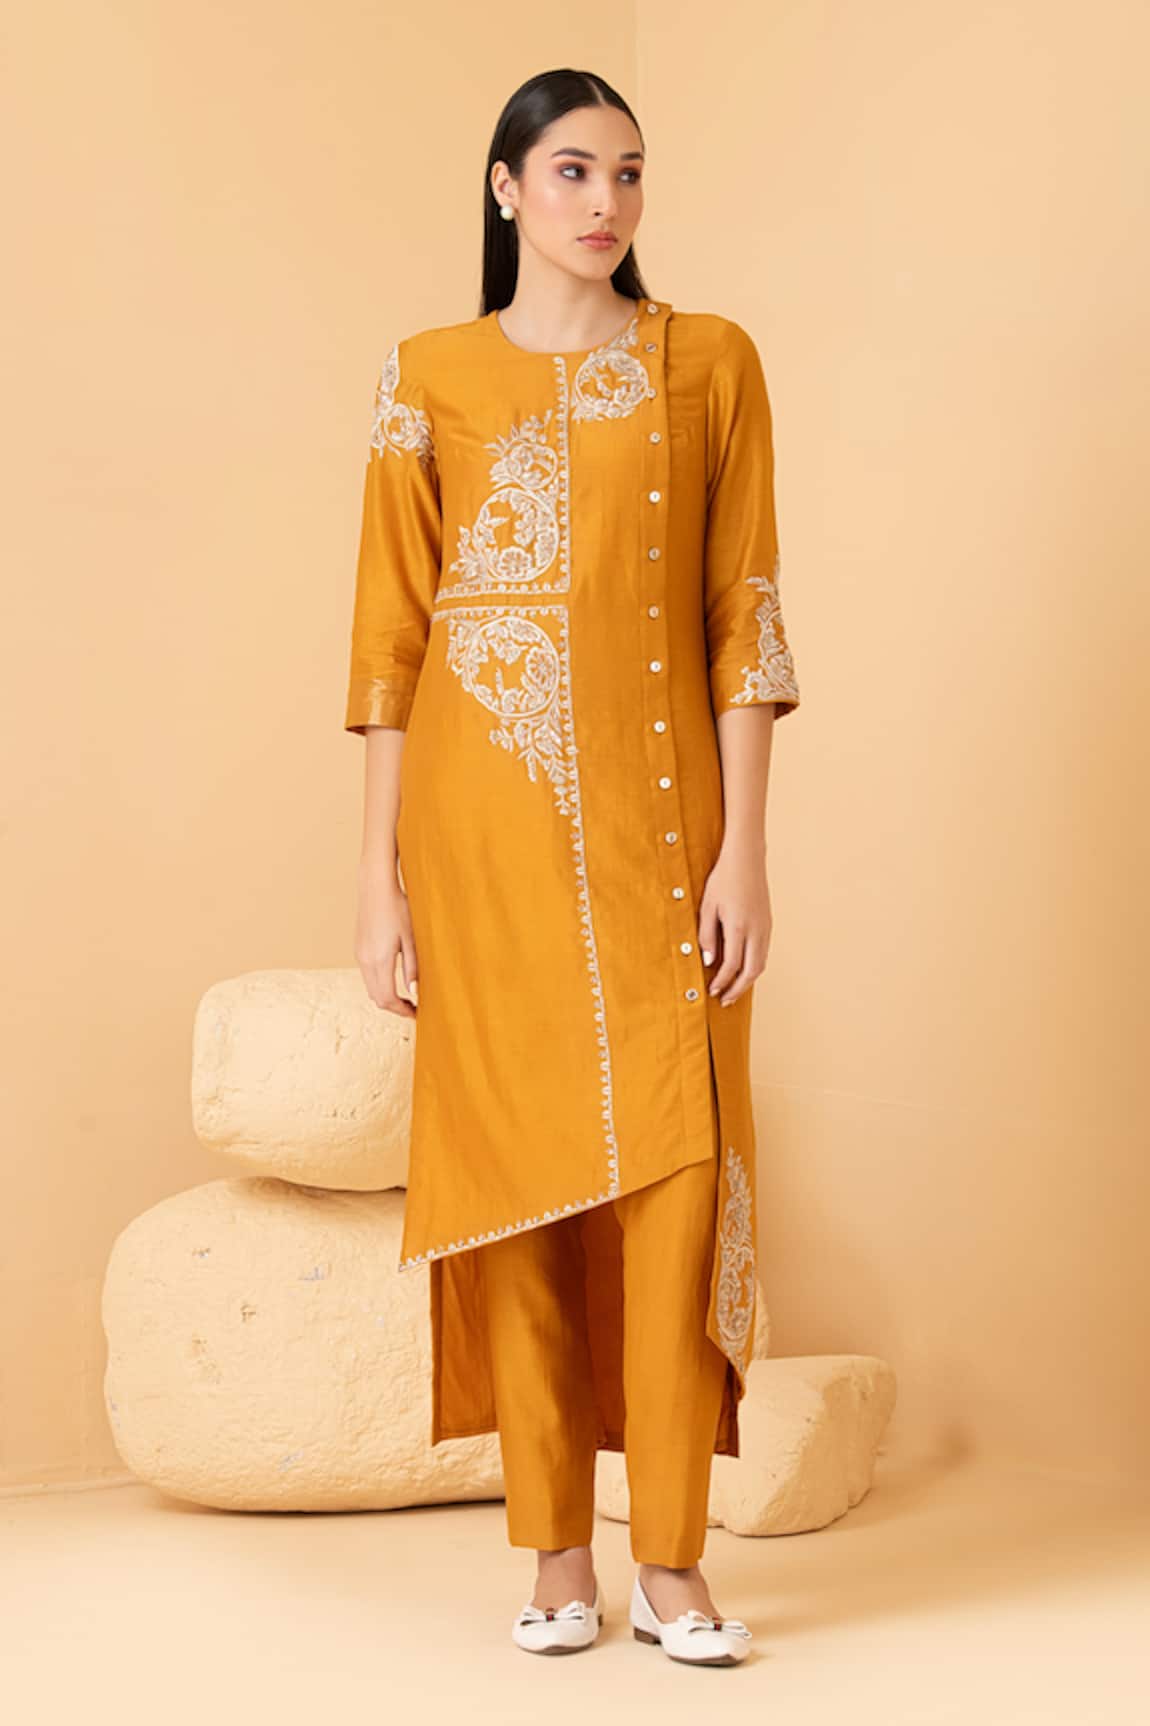 Divi by sonal khandelwal Chanderi Zari Embroidered Tunic & Pant Set